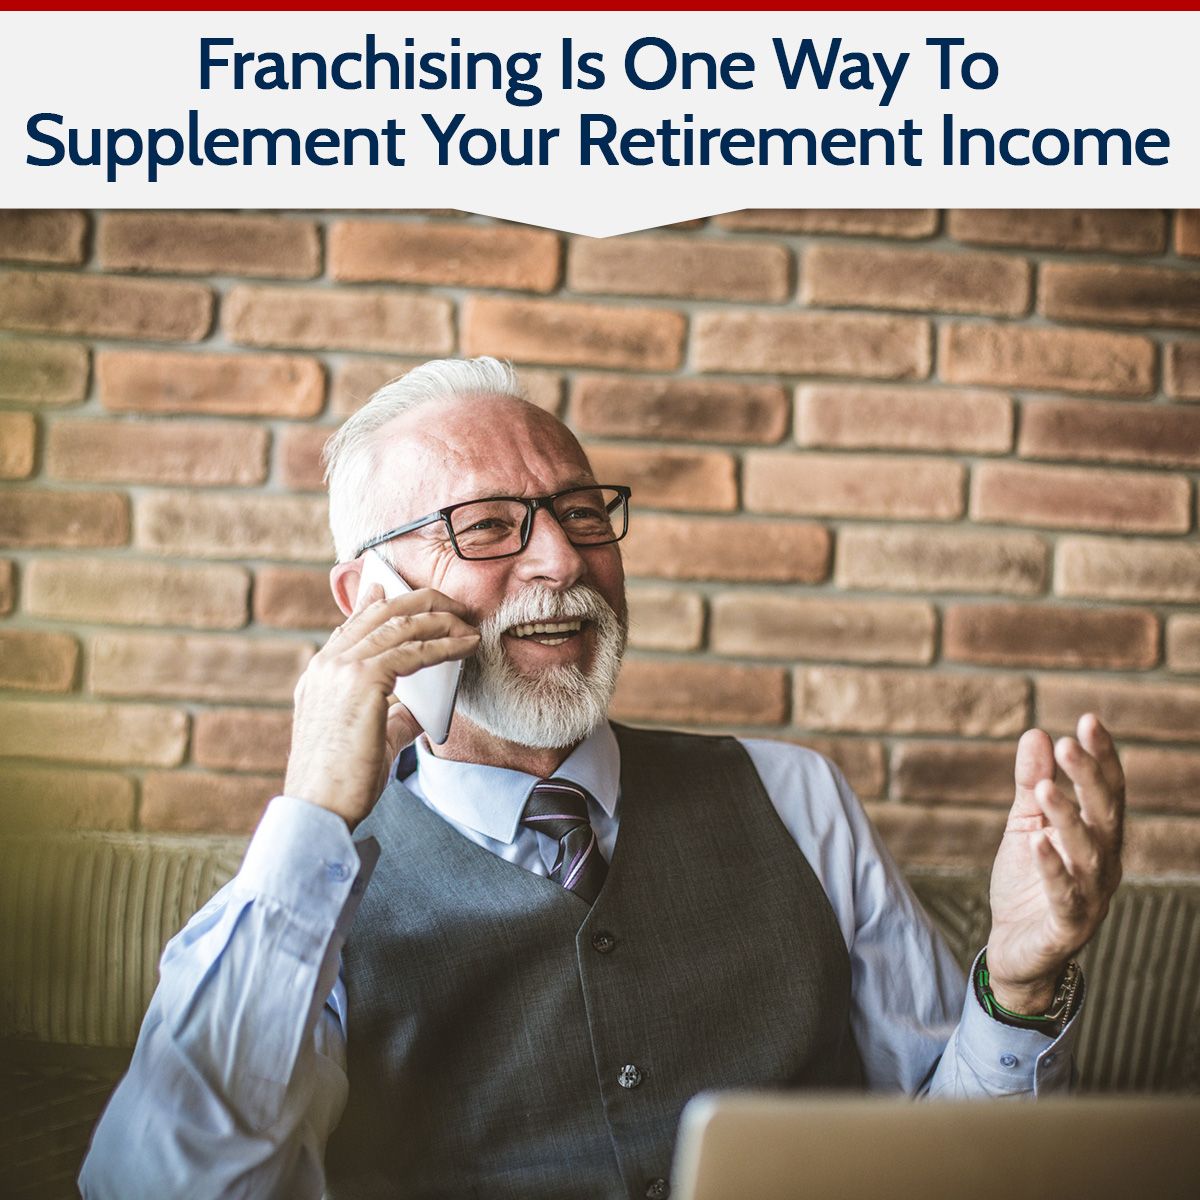 Franchising Is One Way To Supplement Your Retirement Income